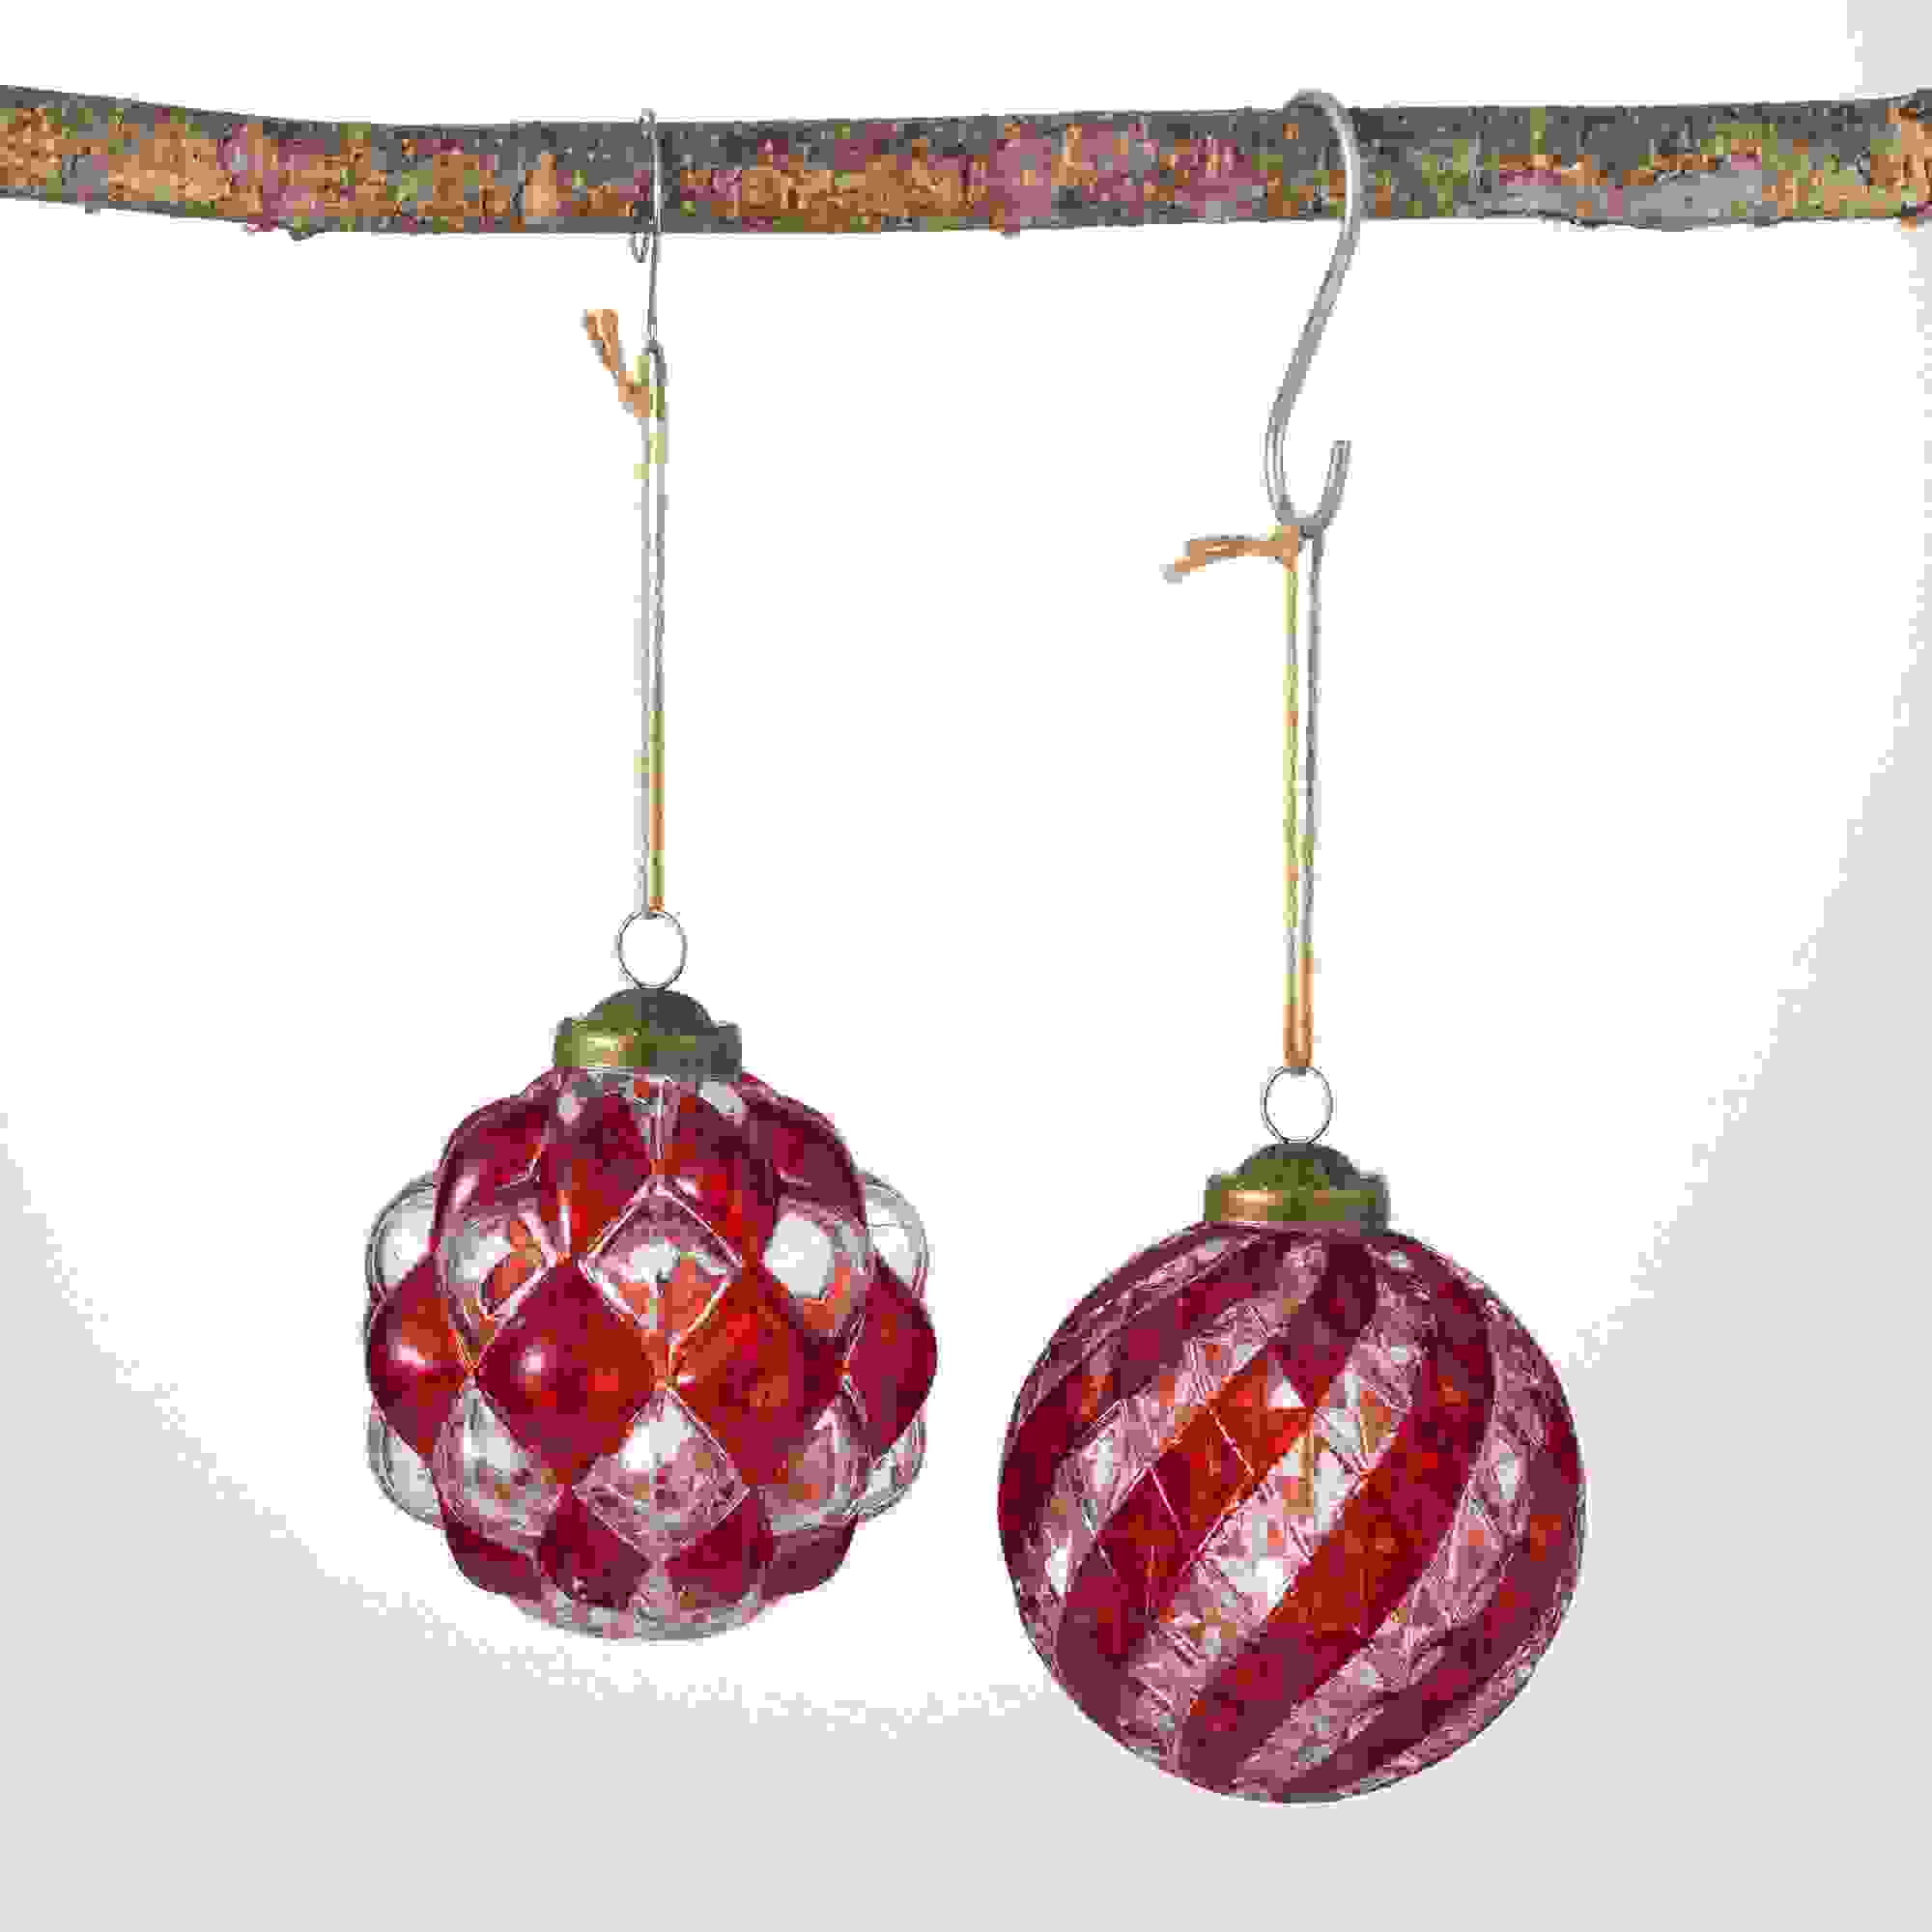 FACETED BALL ORNAMENT SET